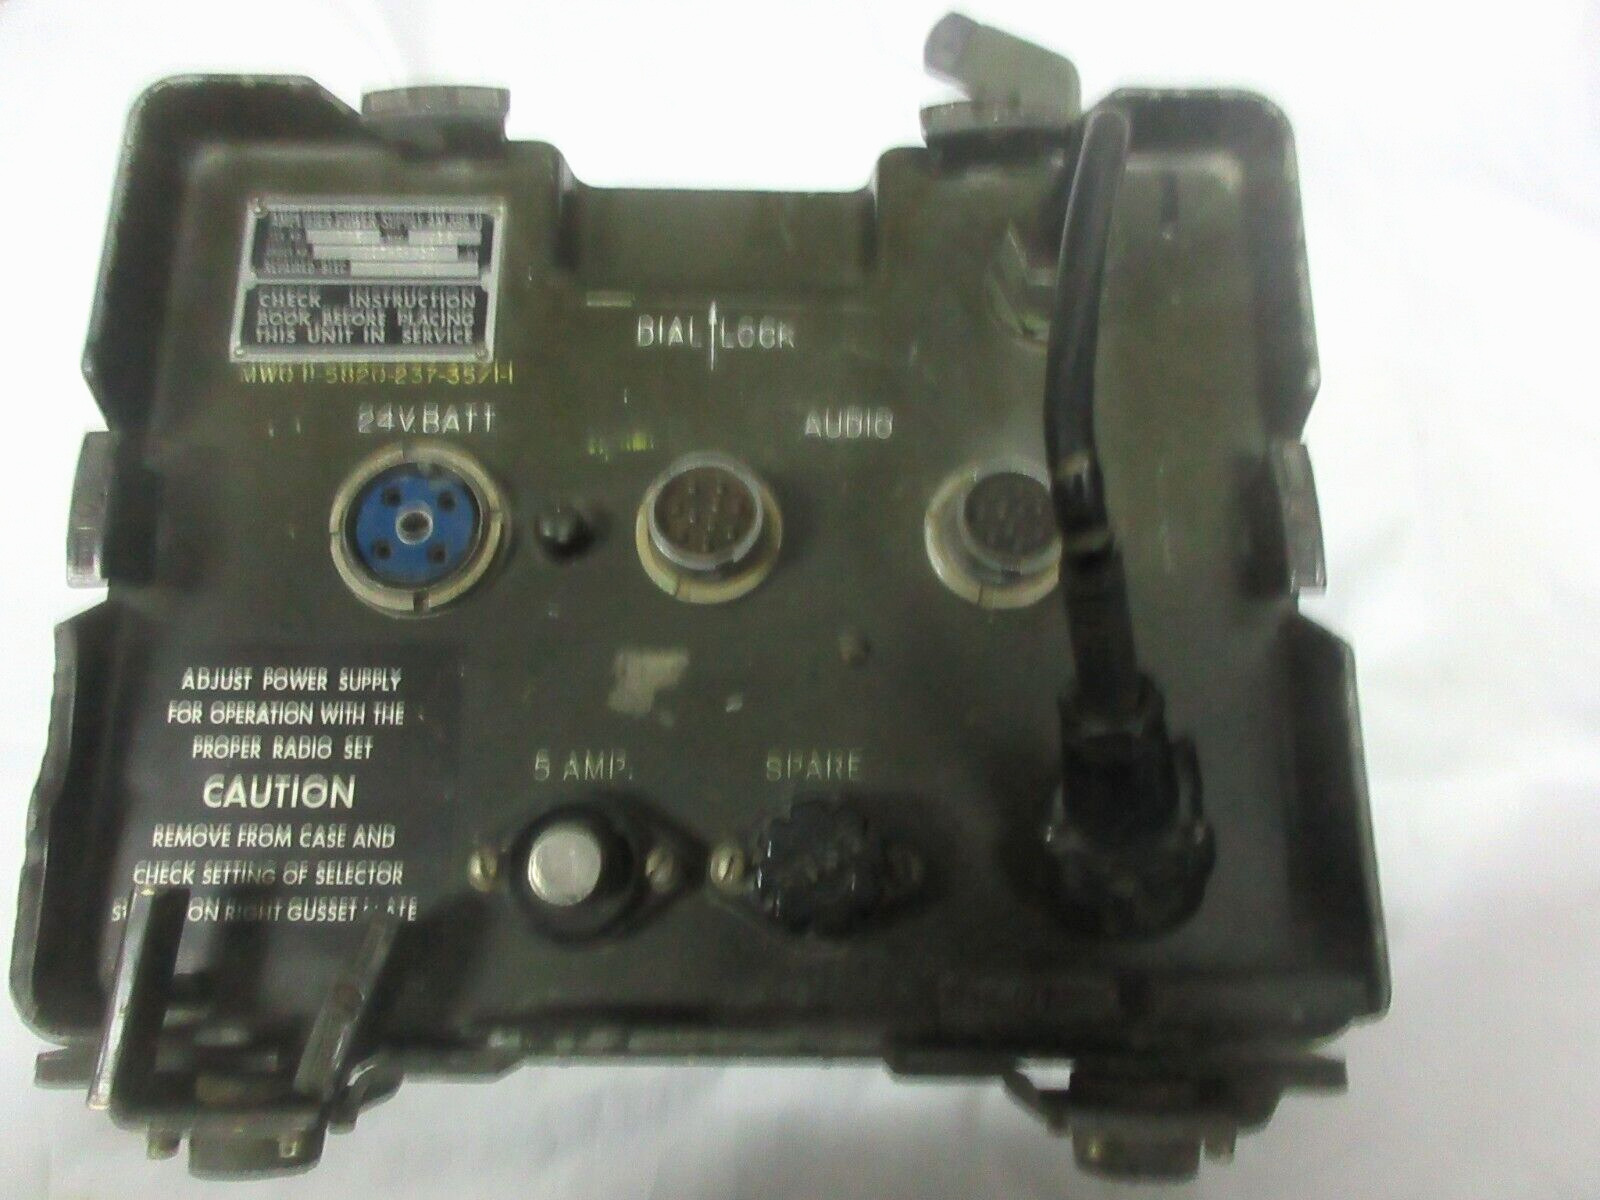 UNIQUE AMPLIFIER POWER SUPPLY AM-598/U US MILITARY USE BY GREEK ARMY COMPLETE